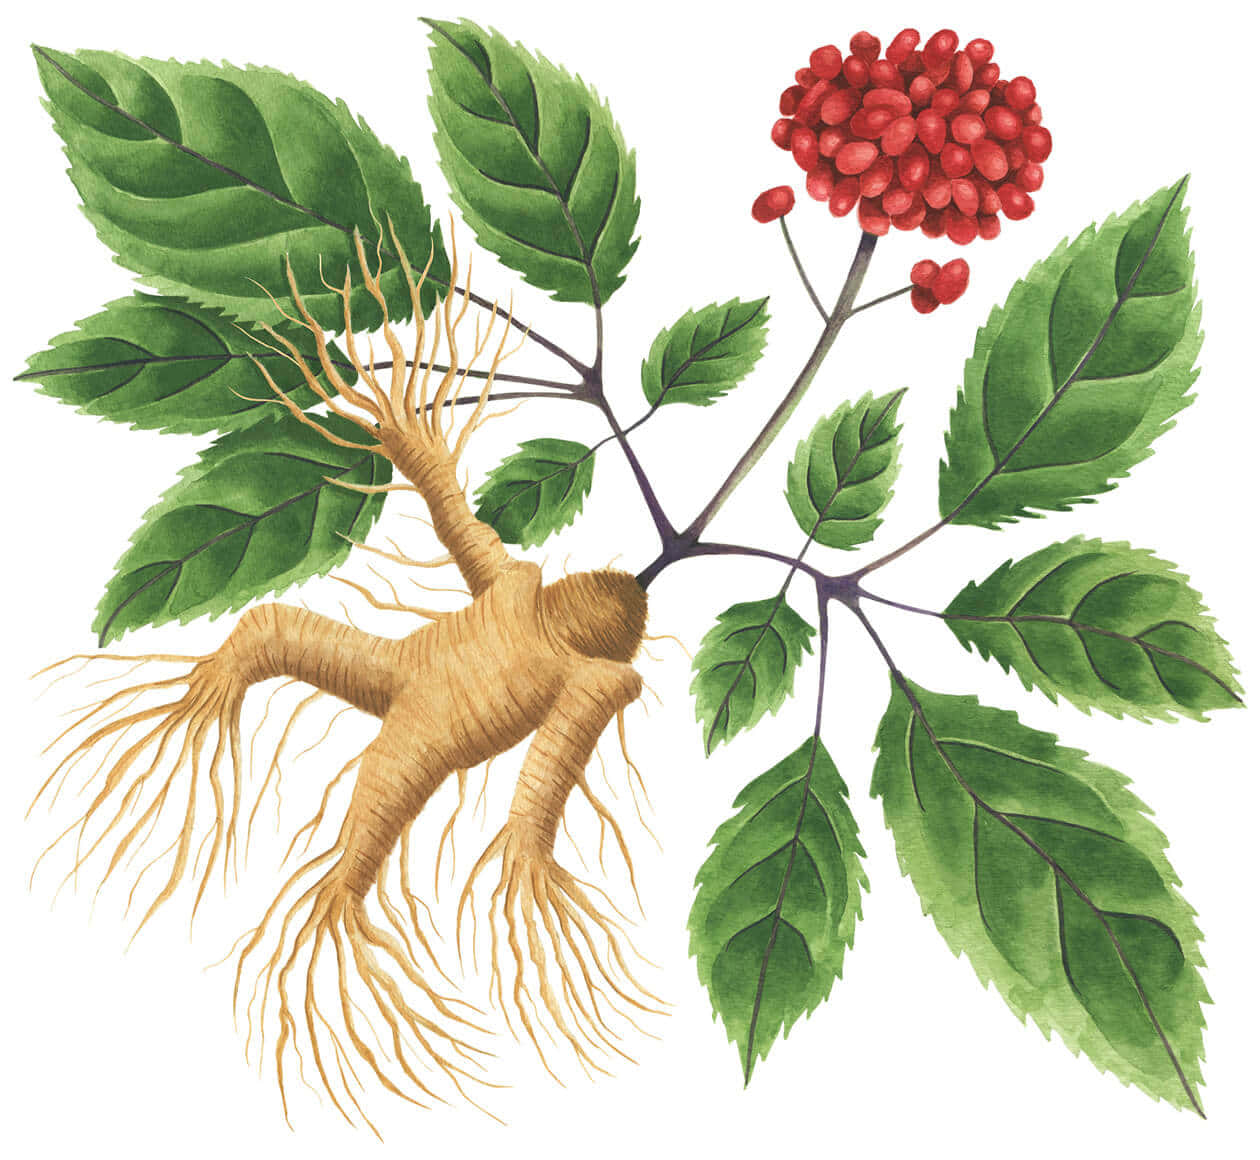 A Drawing Of A Ginseng Plant With Red Berries